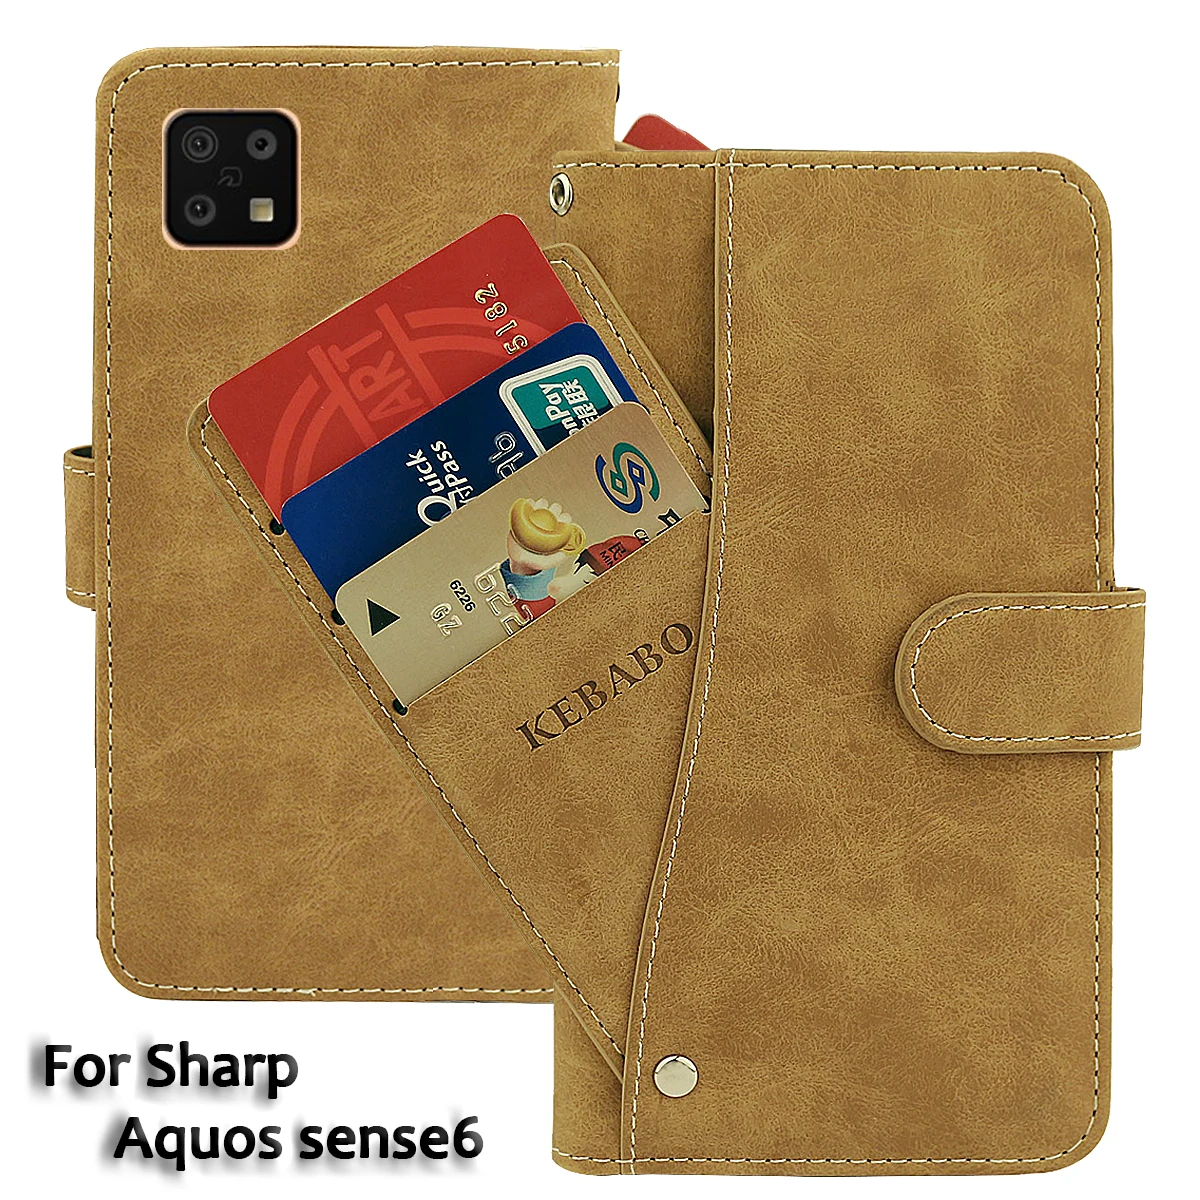 

Vintage Leather Wallet For Sharp Aquos sense6 Case 6.1" Flip Luxury Card Slots Cover Magnet Phone Protective Cases Bags